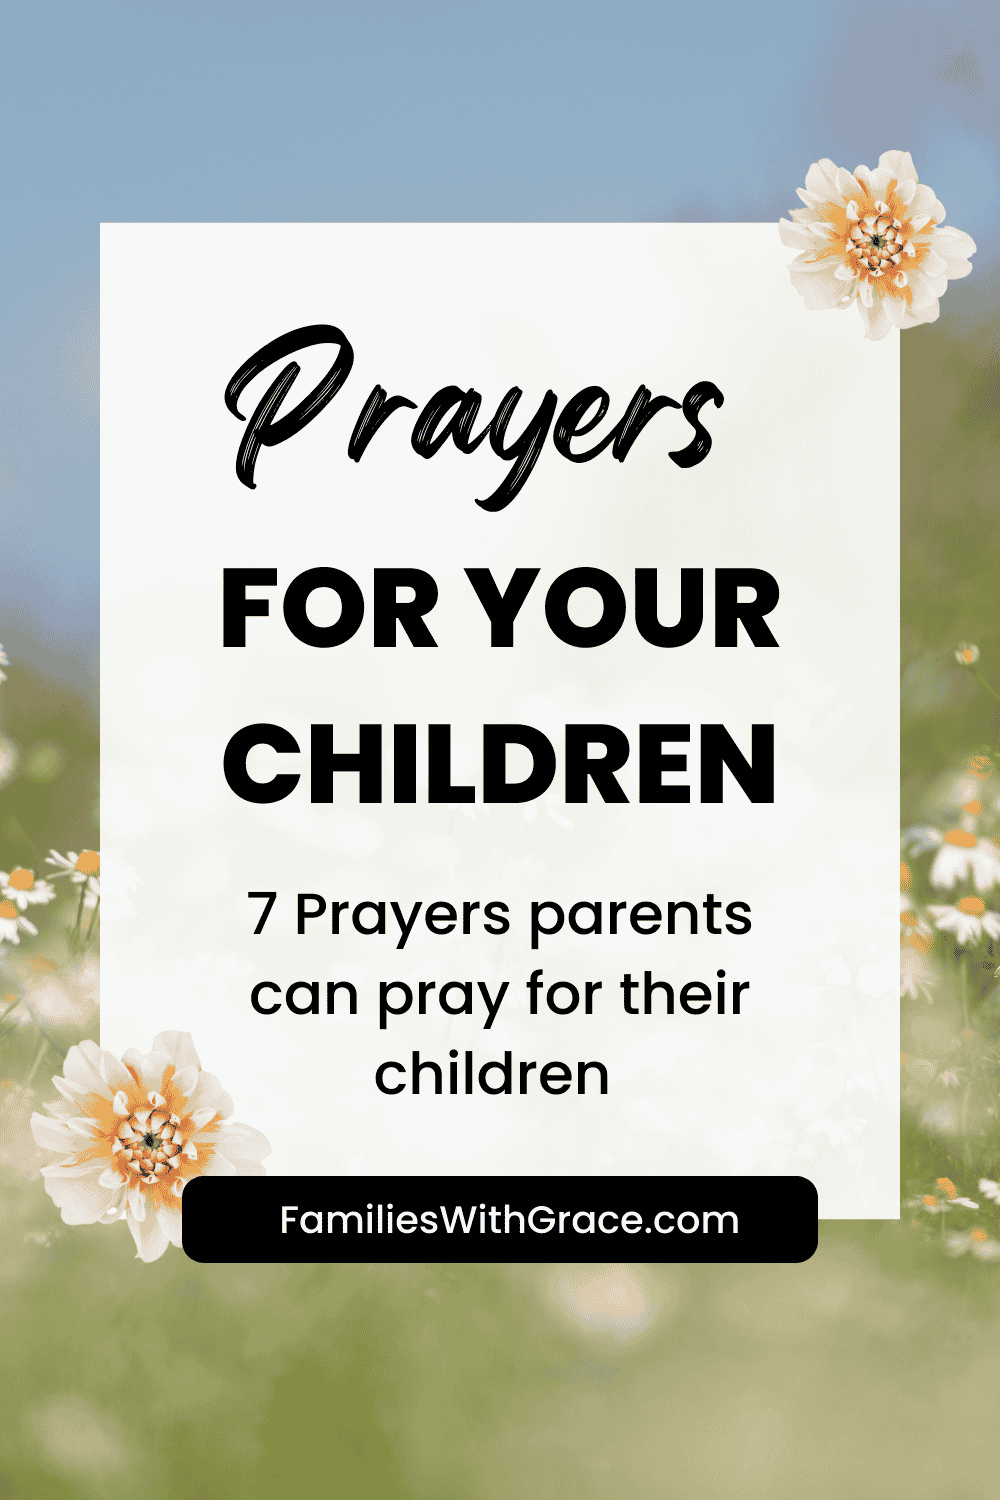 Prayers for your children: Part 1